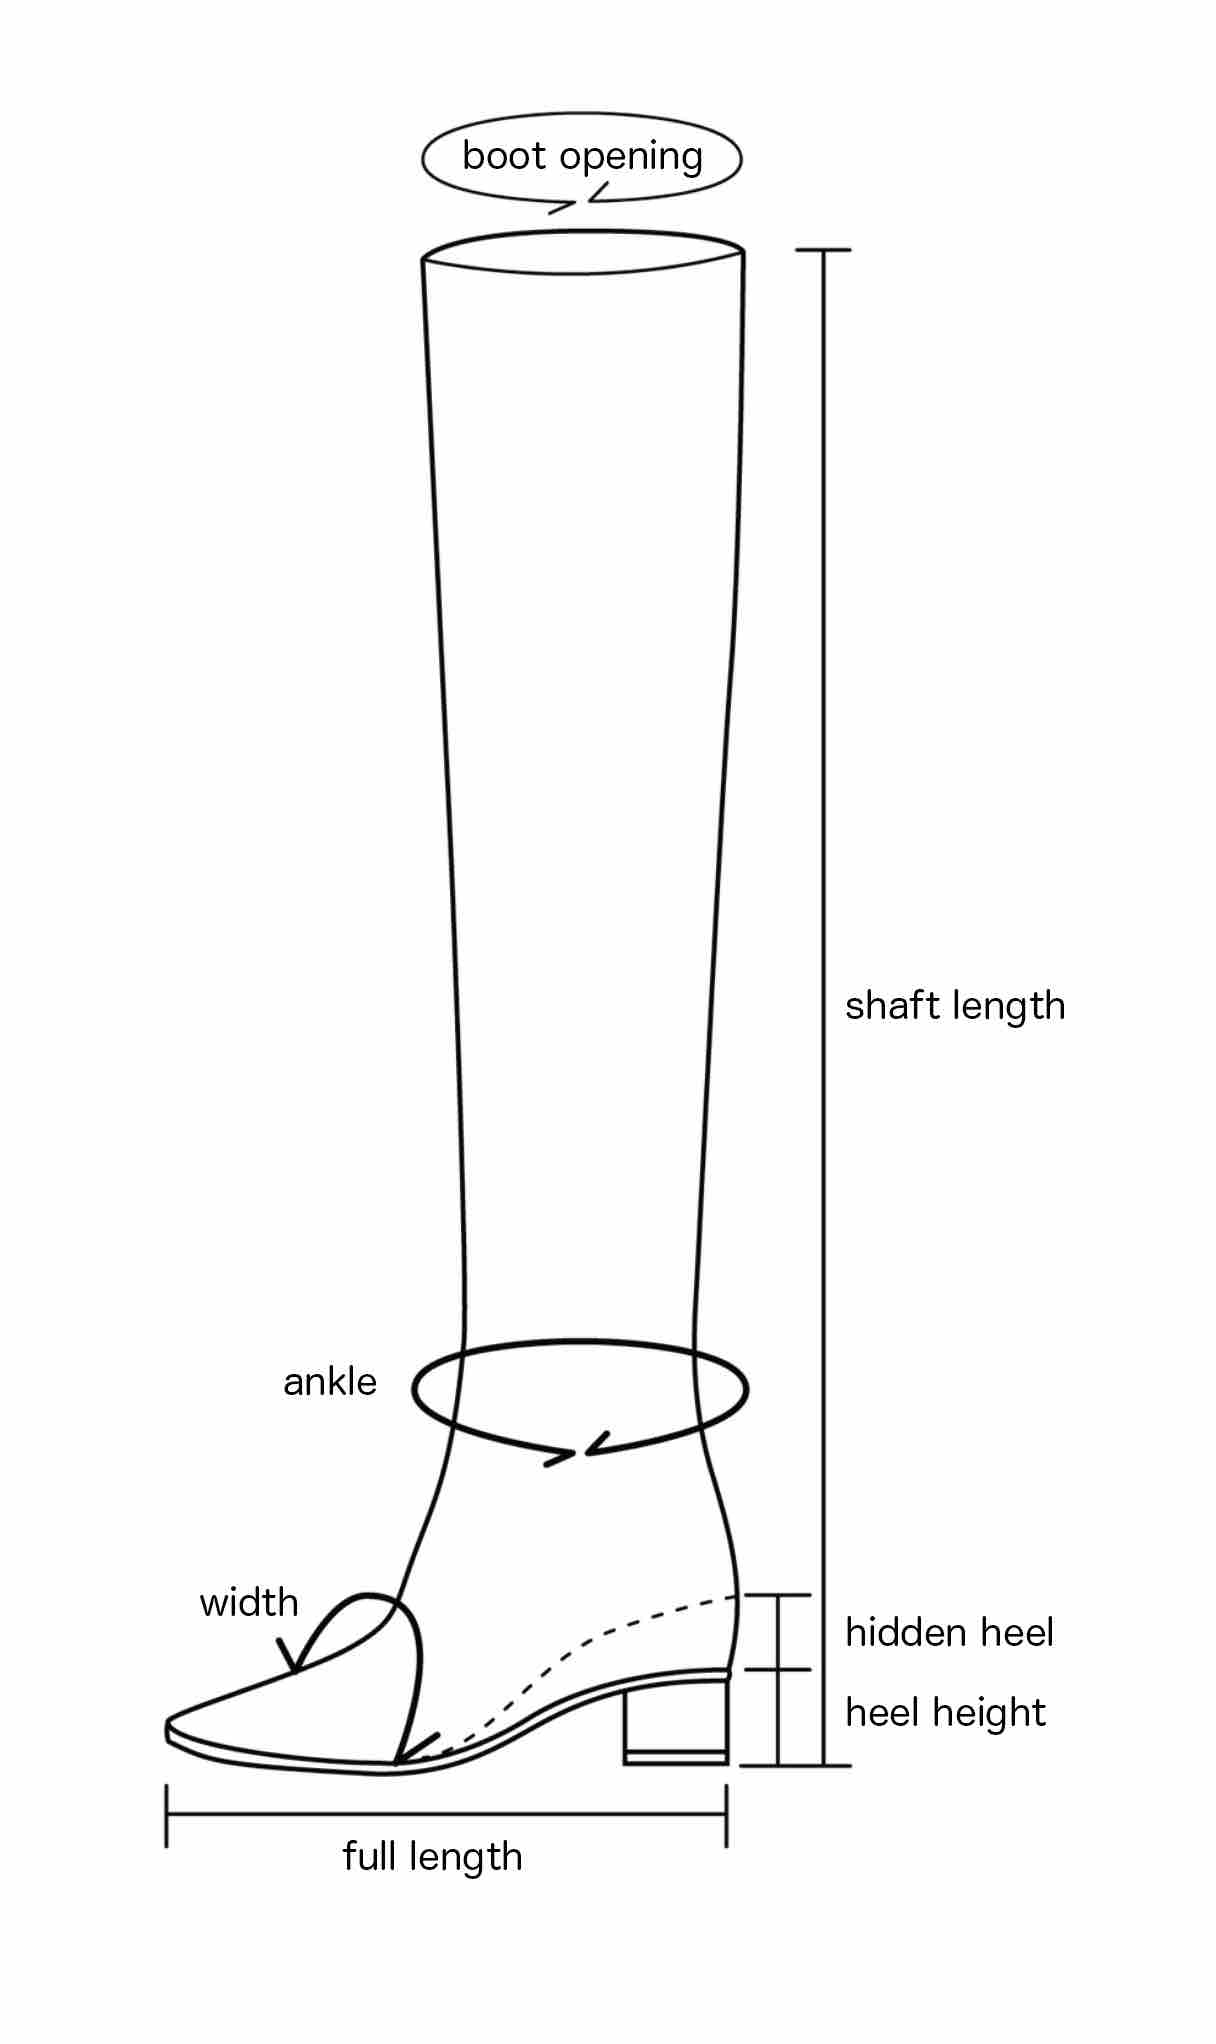 Lower leg/foot markers for (A) NS-SHOES (non-supportive textile shoes)... |  Download Scientific Diagram